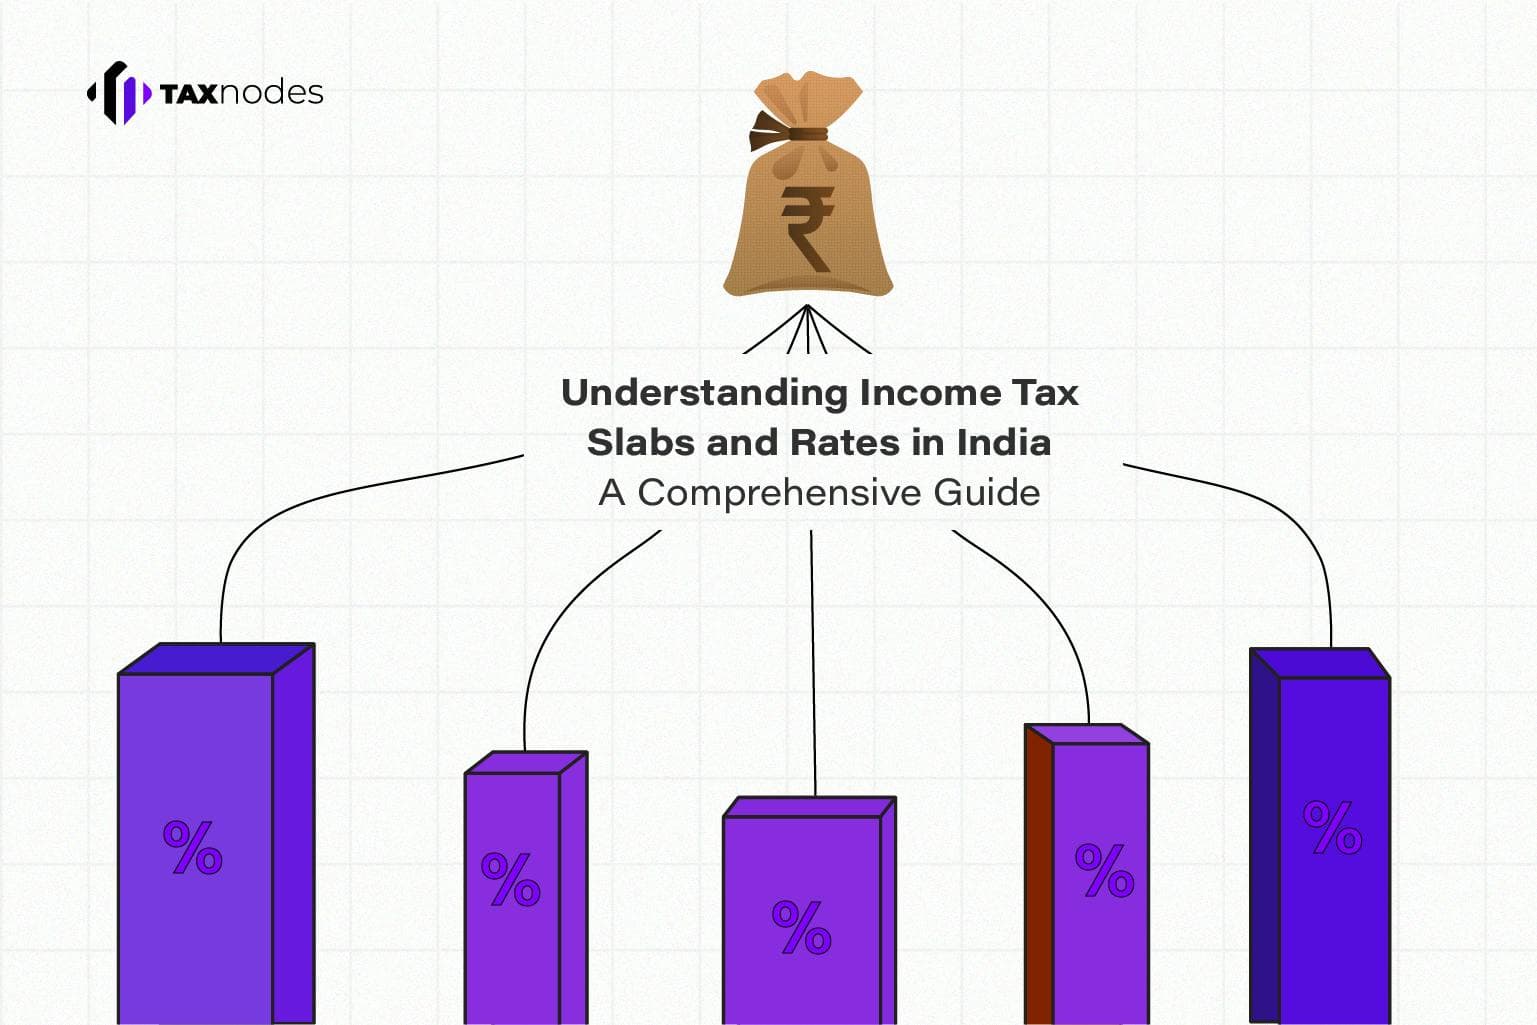 Understanding income tax slabs and rates in India: a comprehensive guide